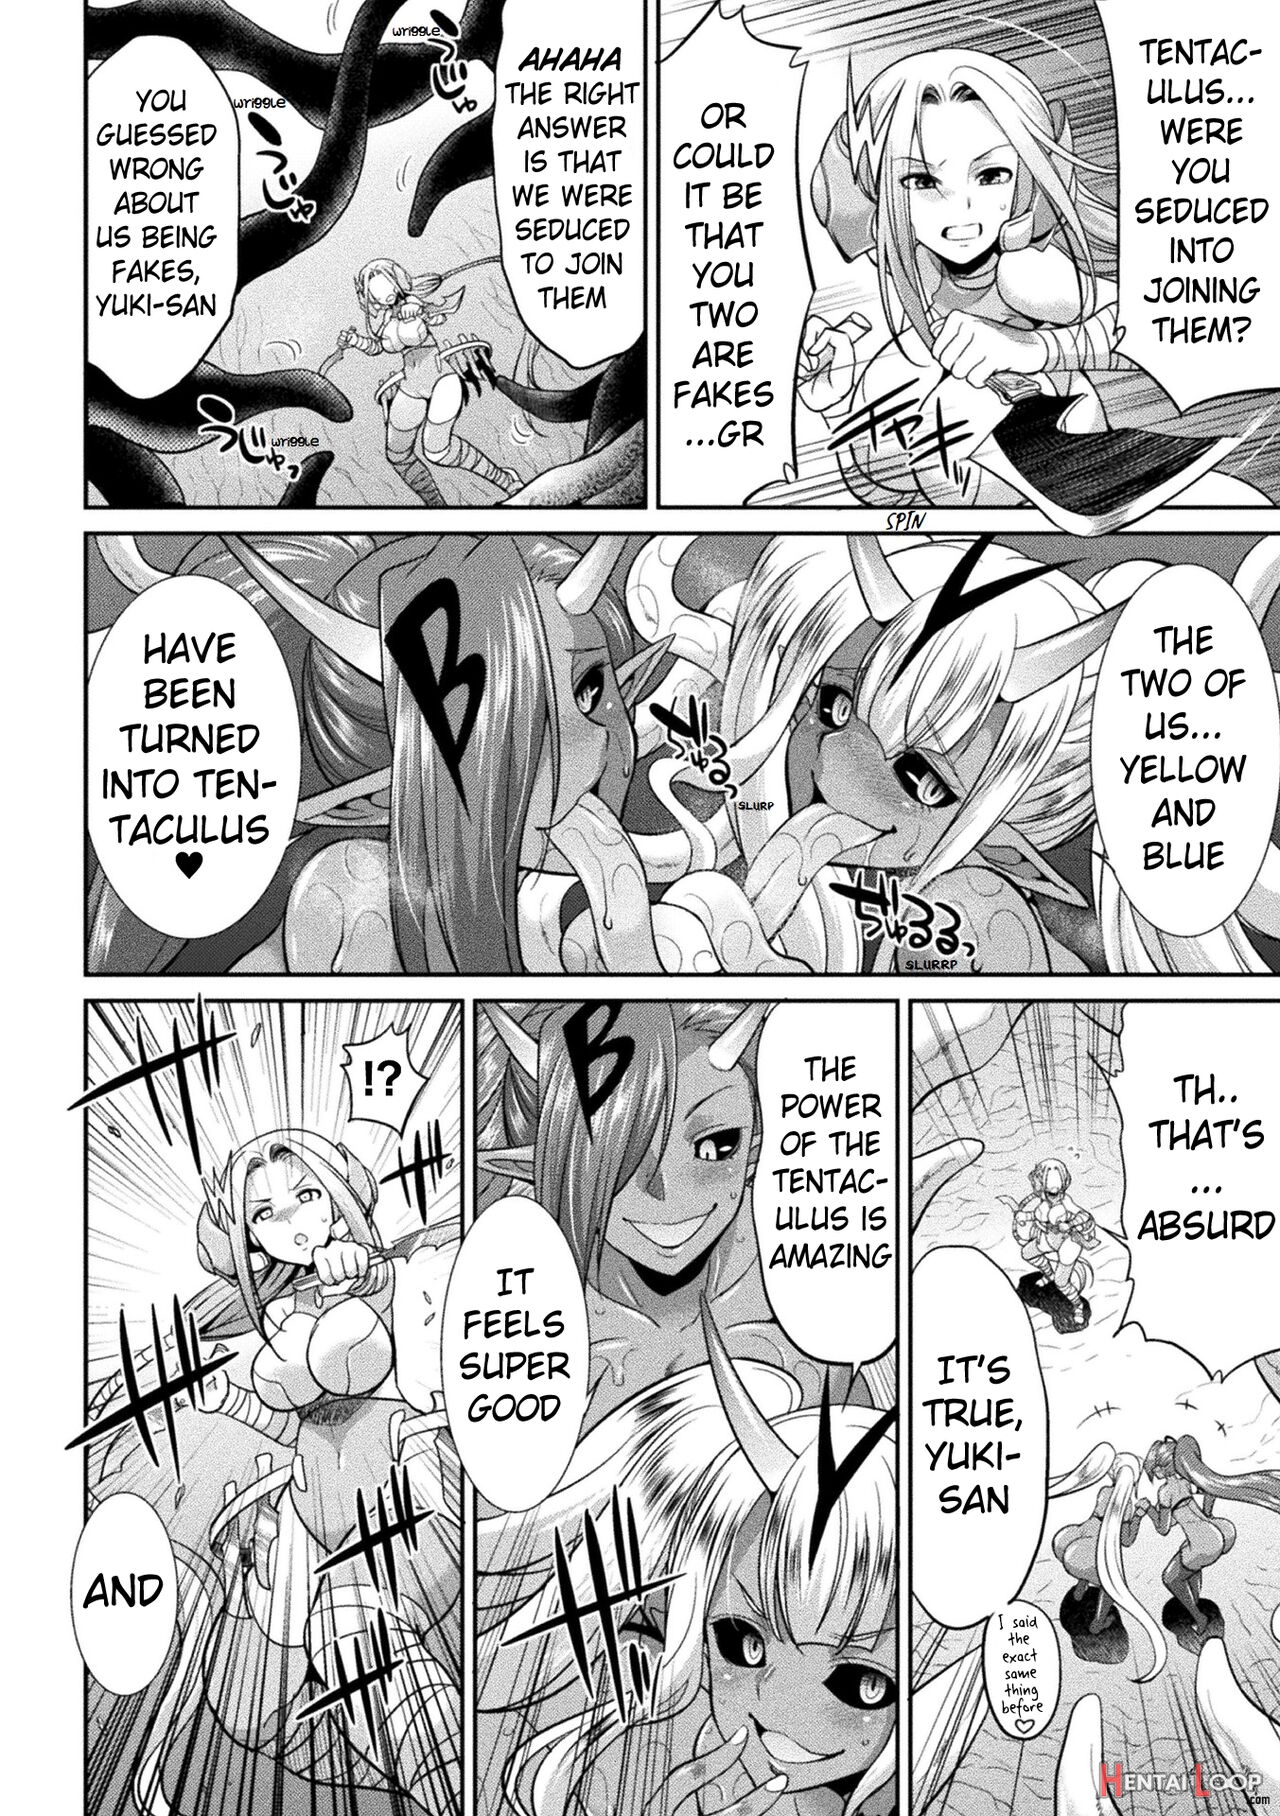 Special Duty Squadron Colorful Force Heroines Of Justice Vs The Tentacle Queen! The Great Battle Of Futa Training!? page 96